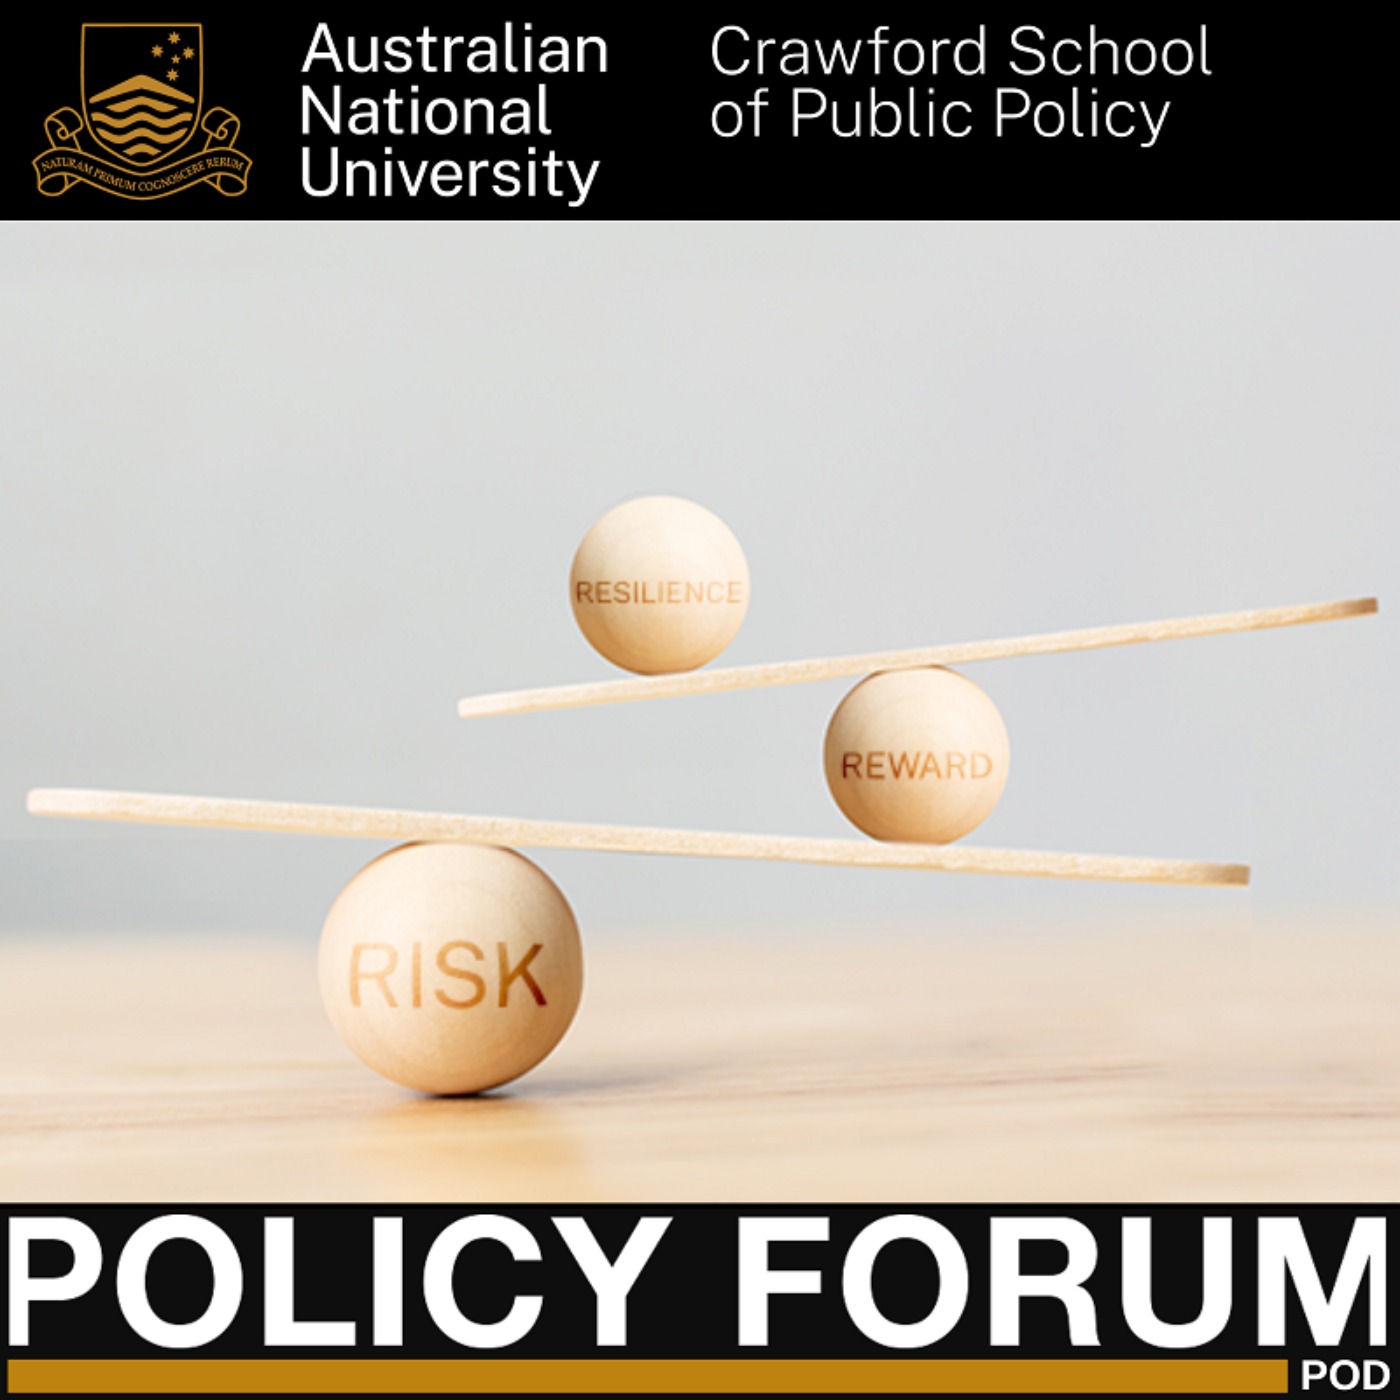 Integrating risk, reward and resilience in policy